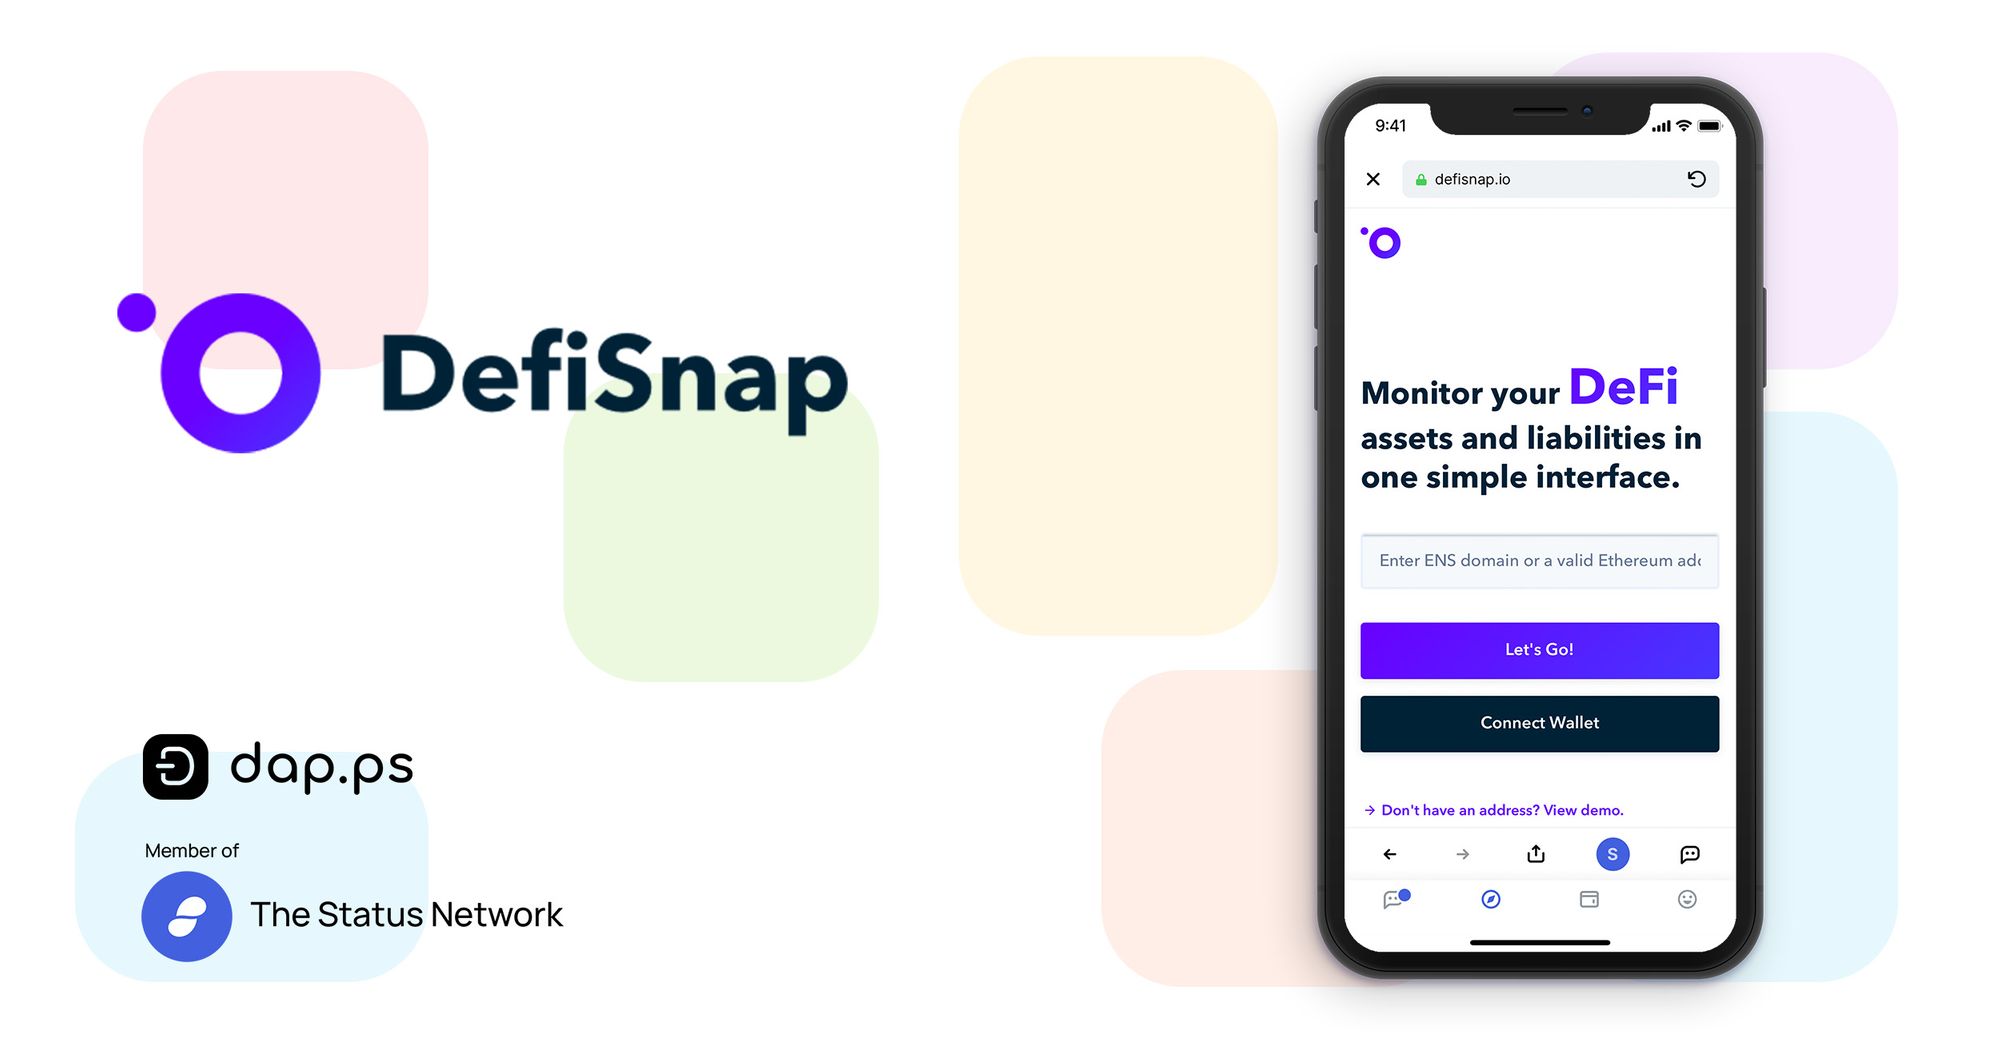 Tracking Your Portfolio with DeFi Snap on dap.ps